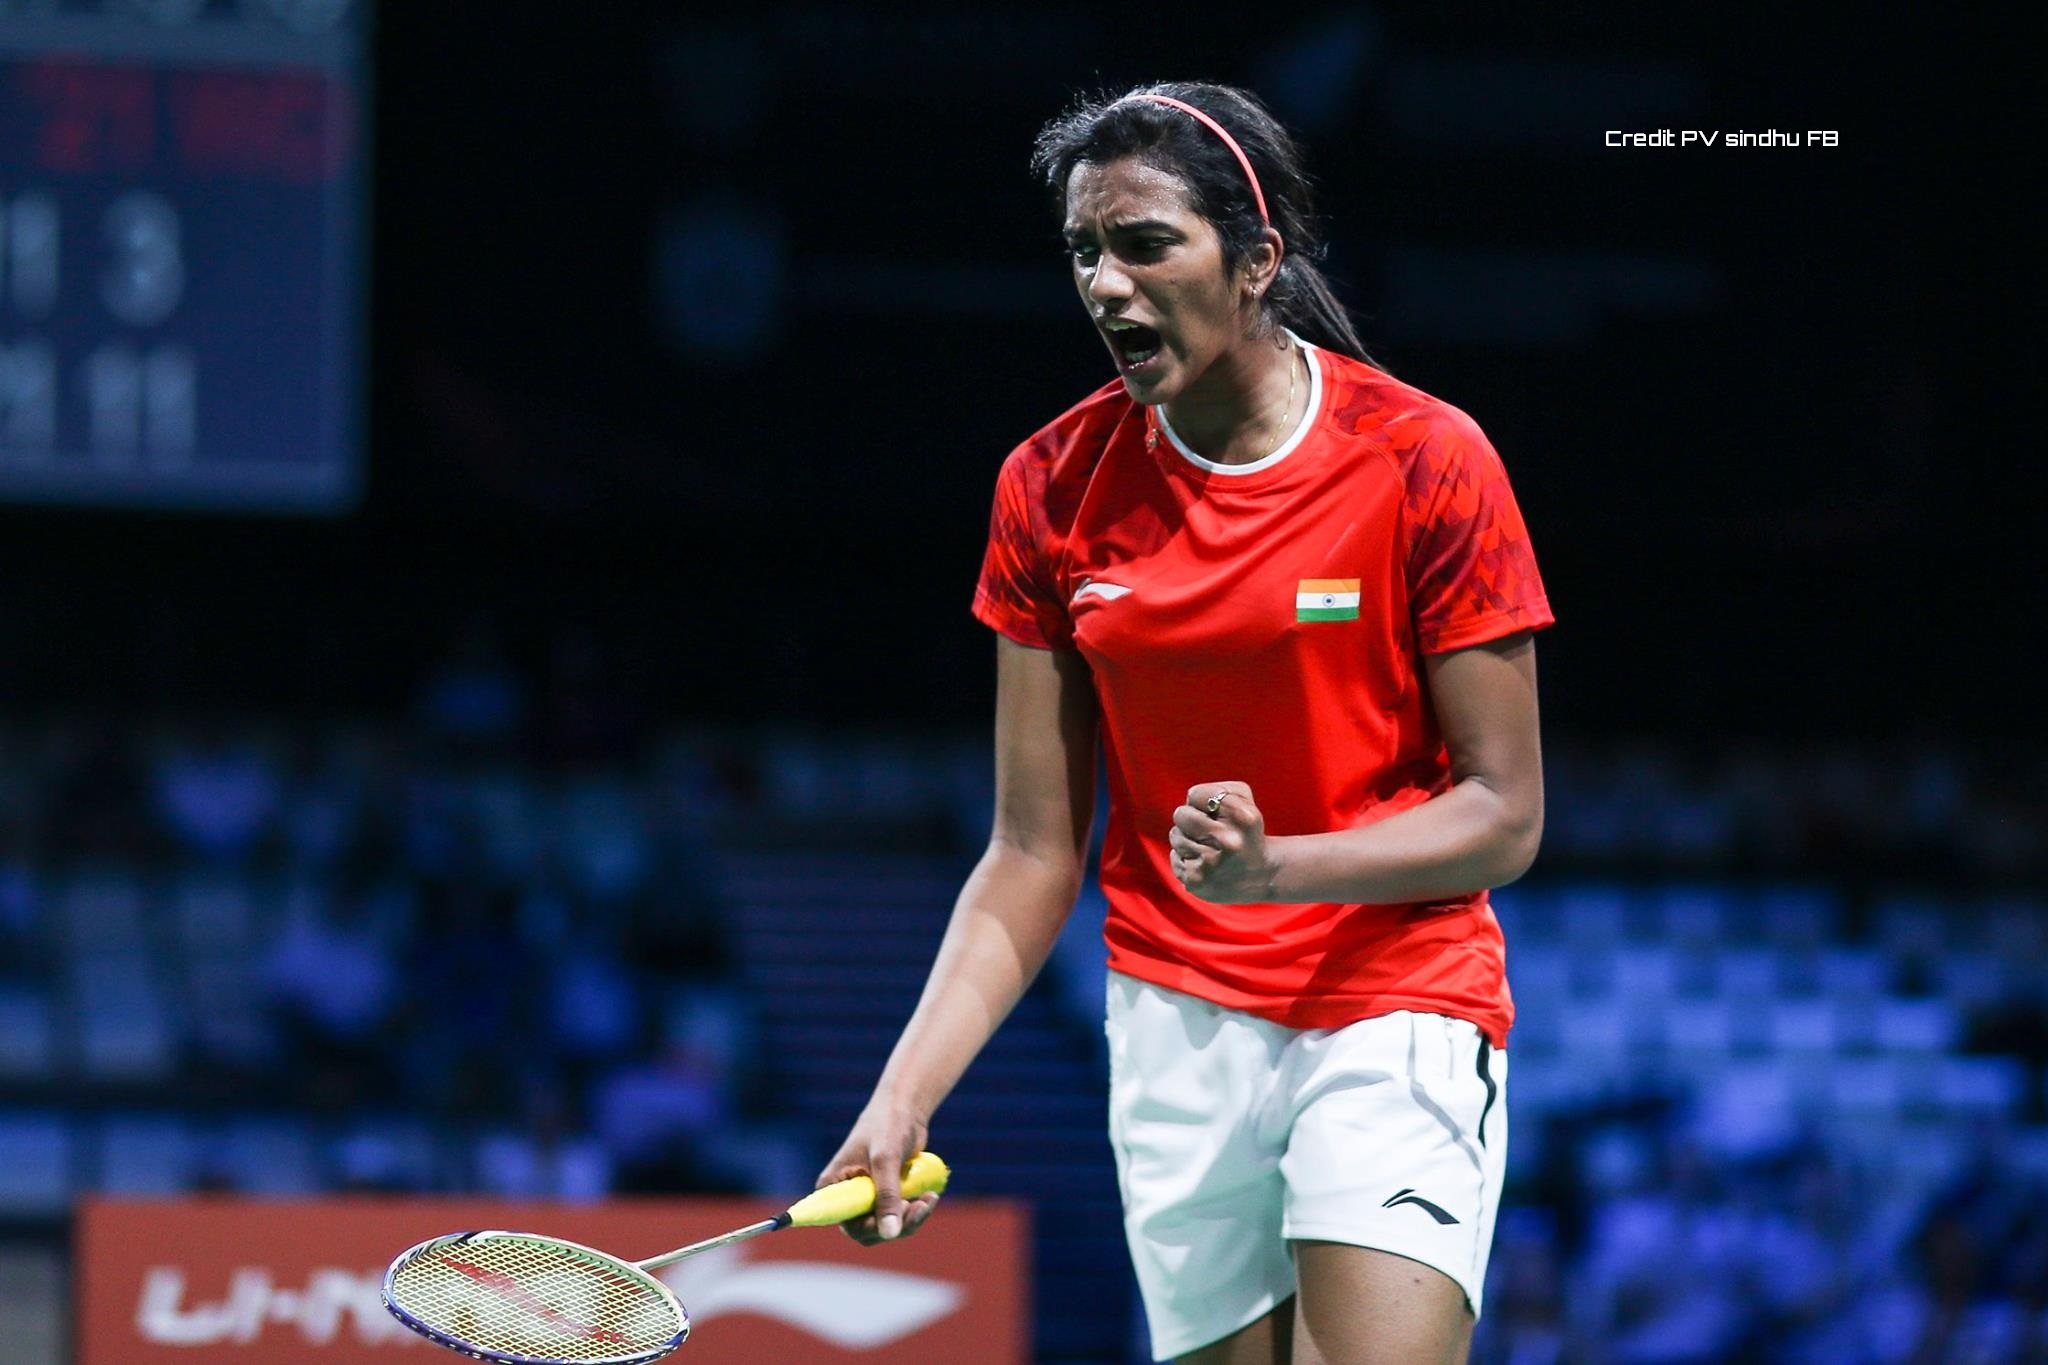 PBL 2016 - PV Sindhu's domination propels Chennai to a comfortable win